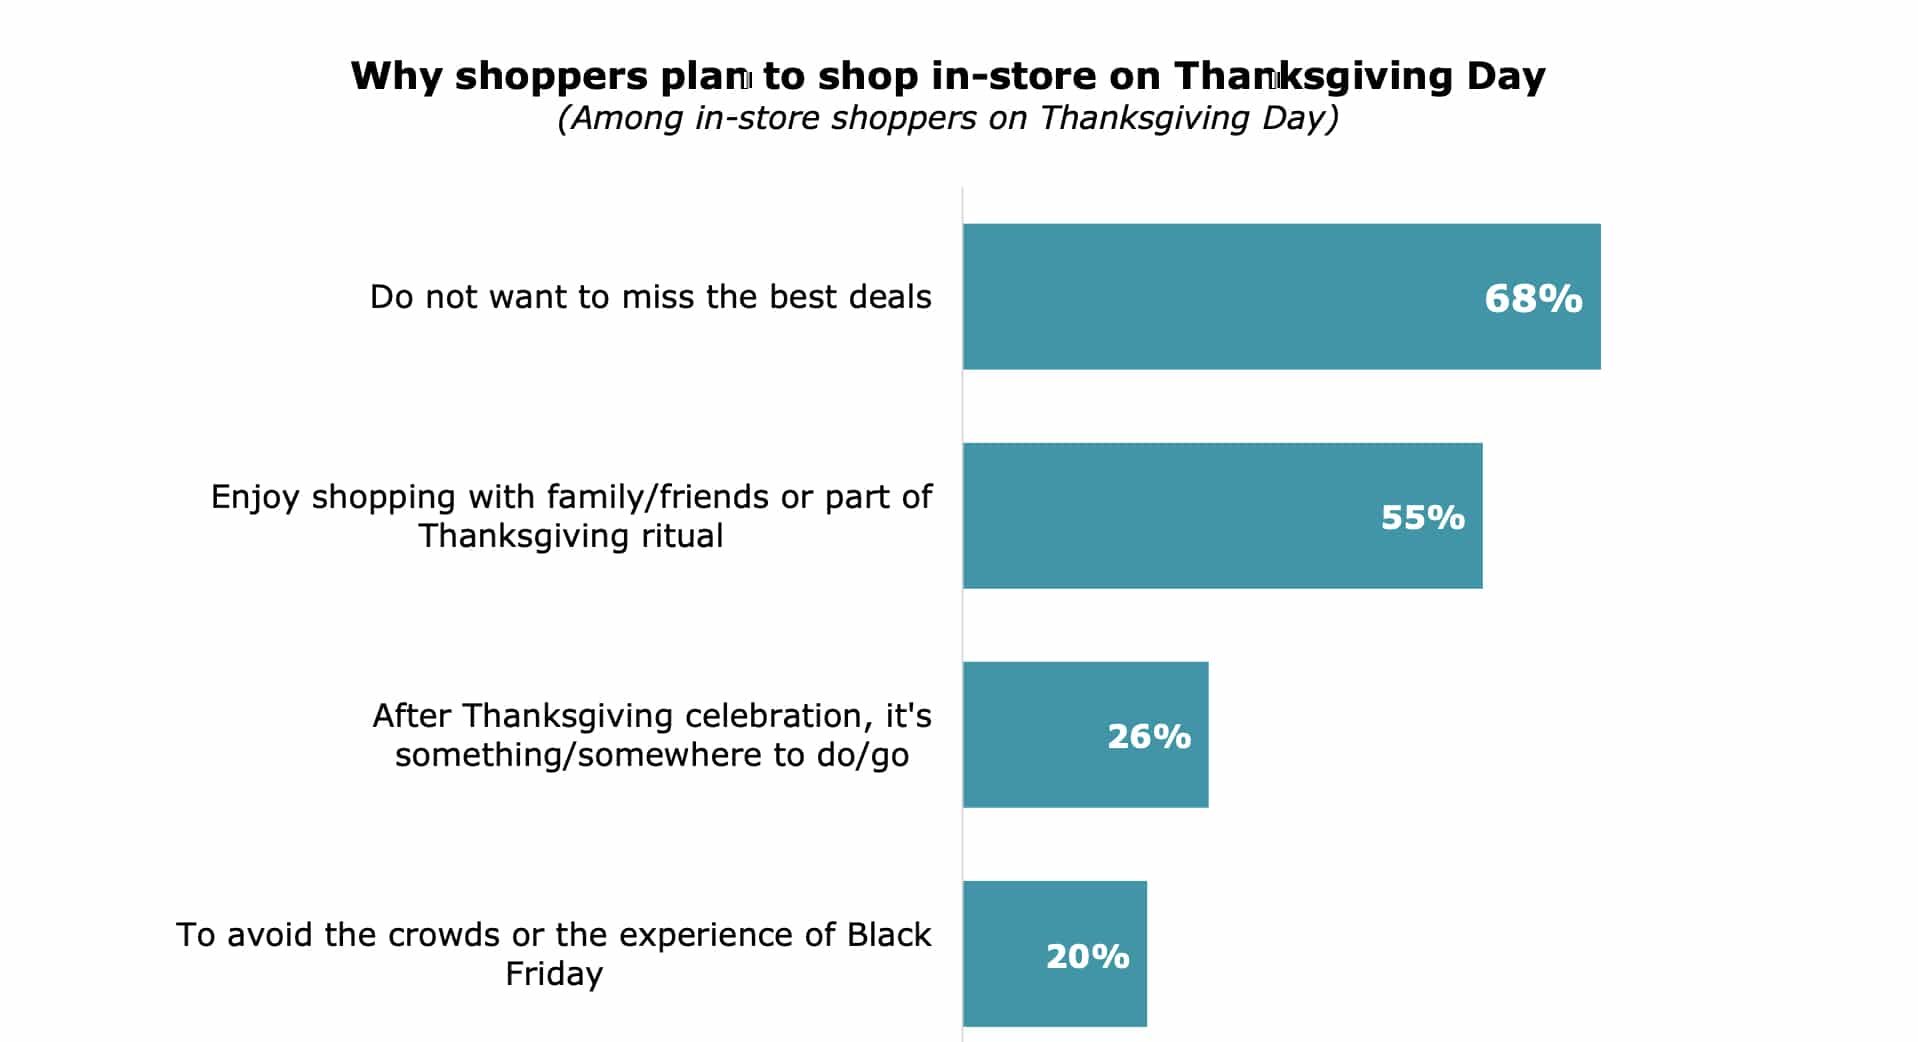 Chart that shows the reasons why shoppers plan to shop in-store on Thanksgiving Day